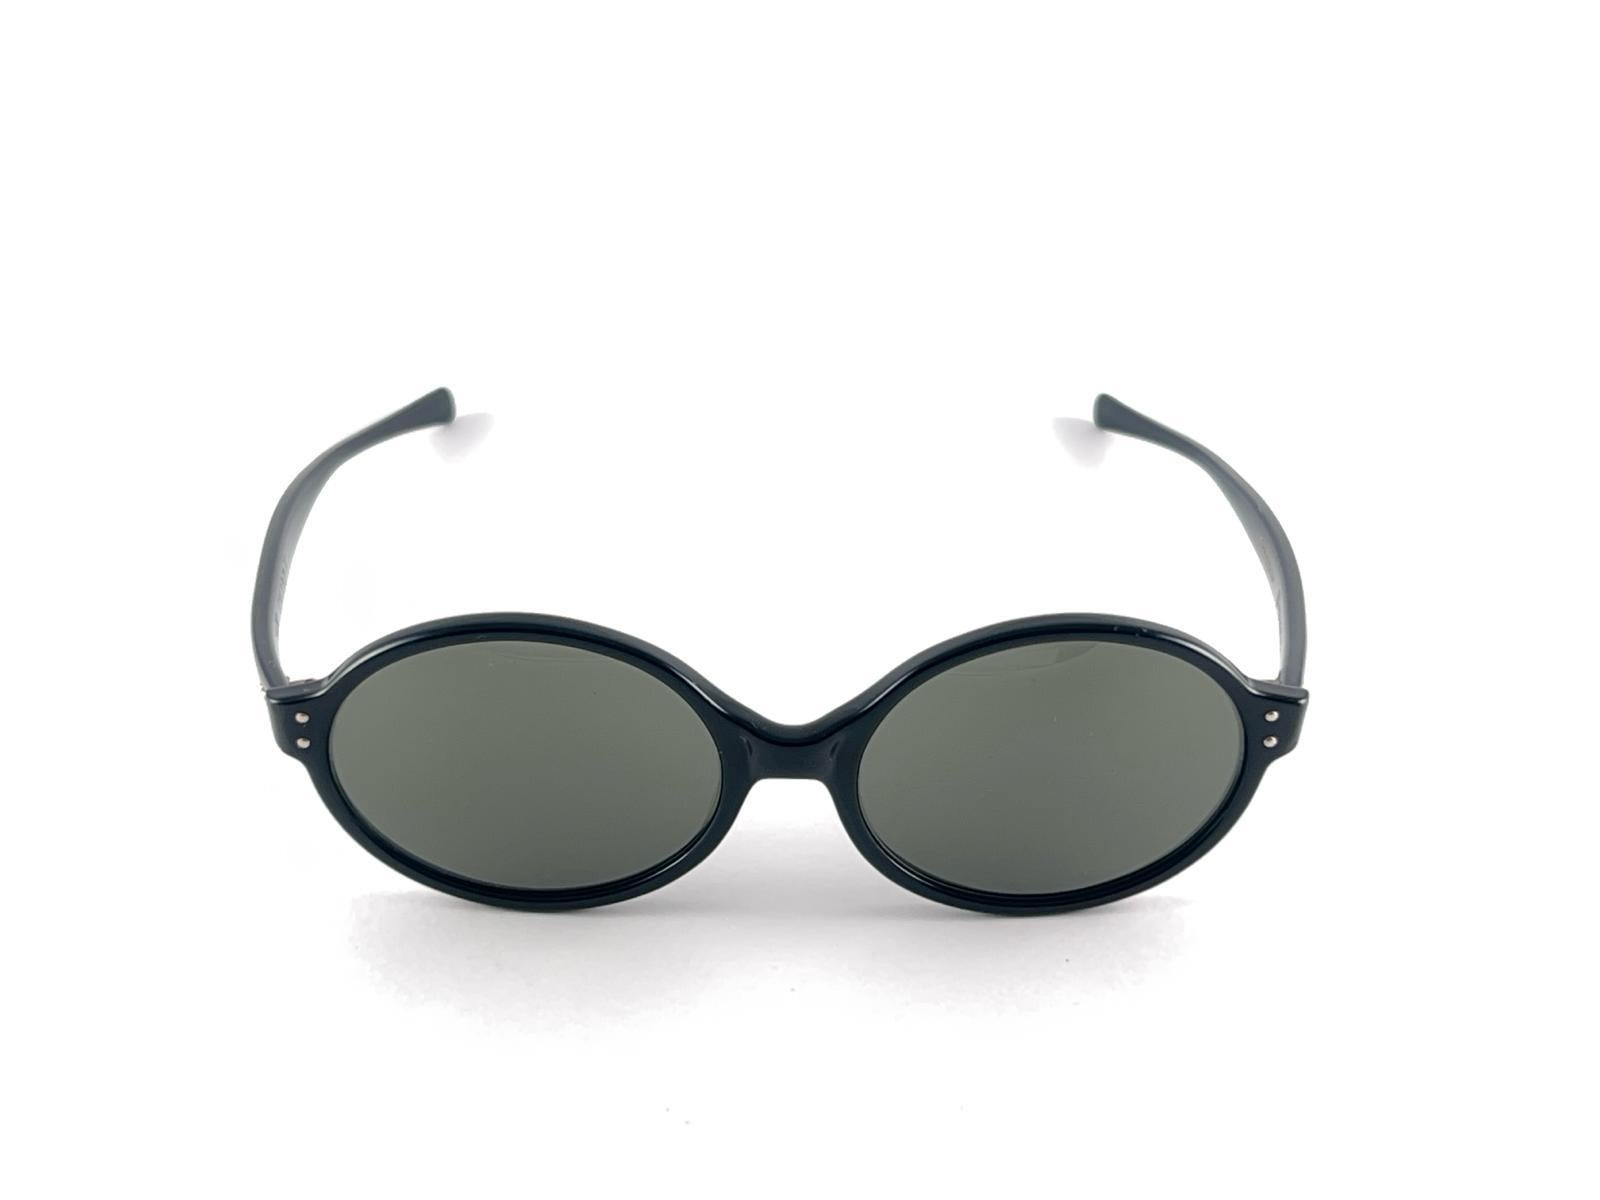 
New Vintage Midcentury American Optical Black Frame
This Brand Is The Responsible For Some Of The Most Iconic Sunglasses In History
New Never Worn Or Display, This Item May Show Minor Sign Of Wear Due To Storage



Made In Usa


Front              